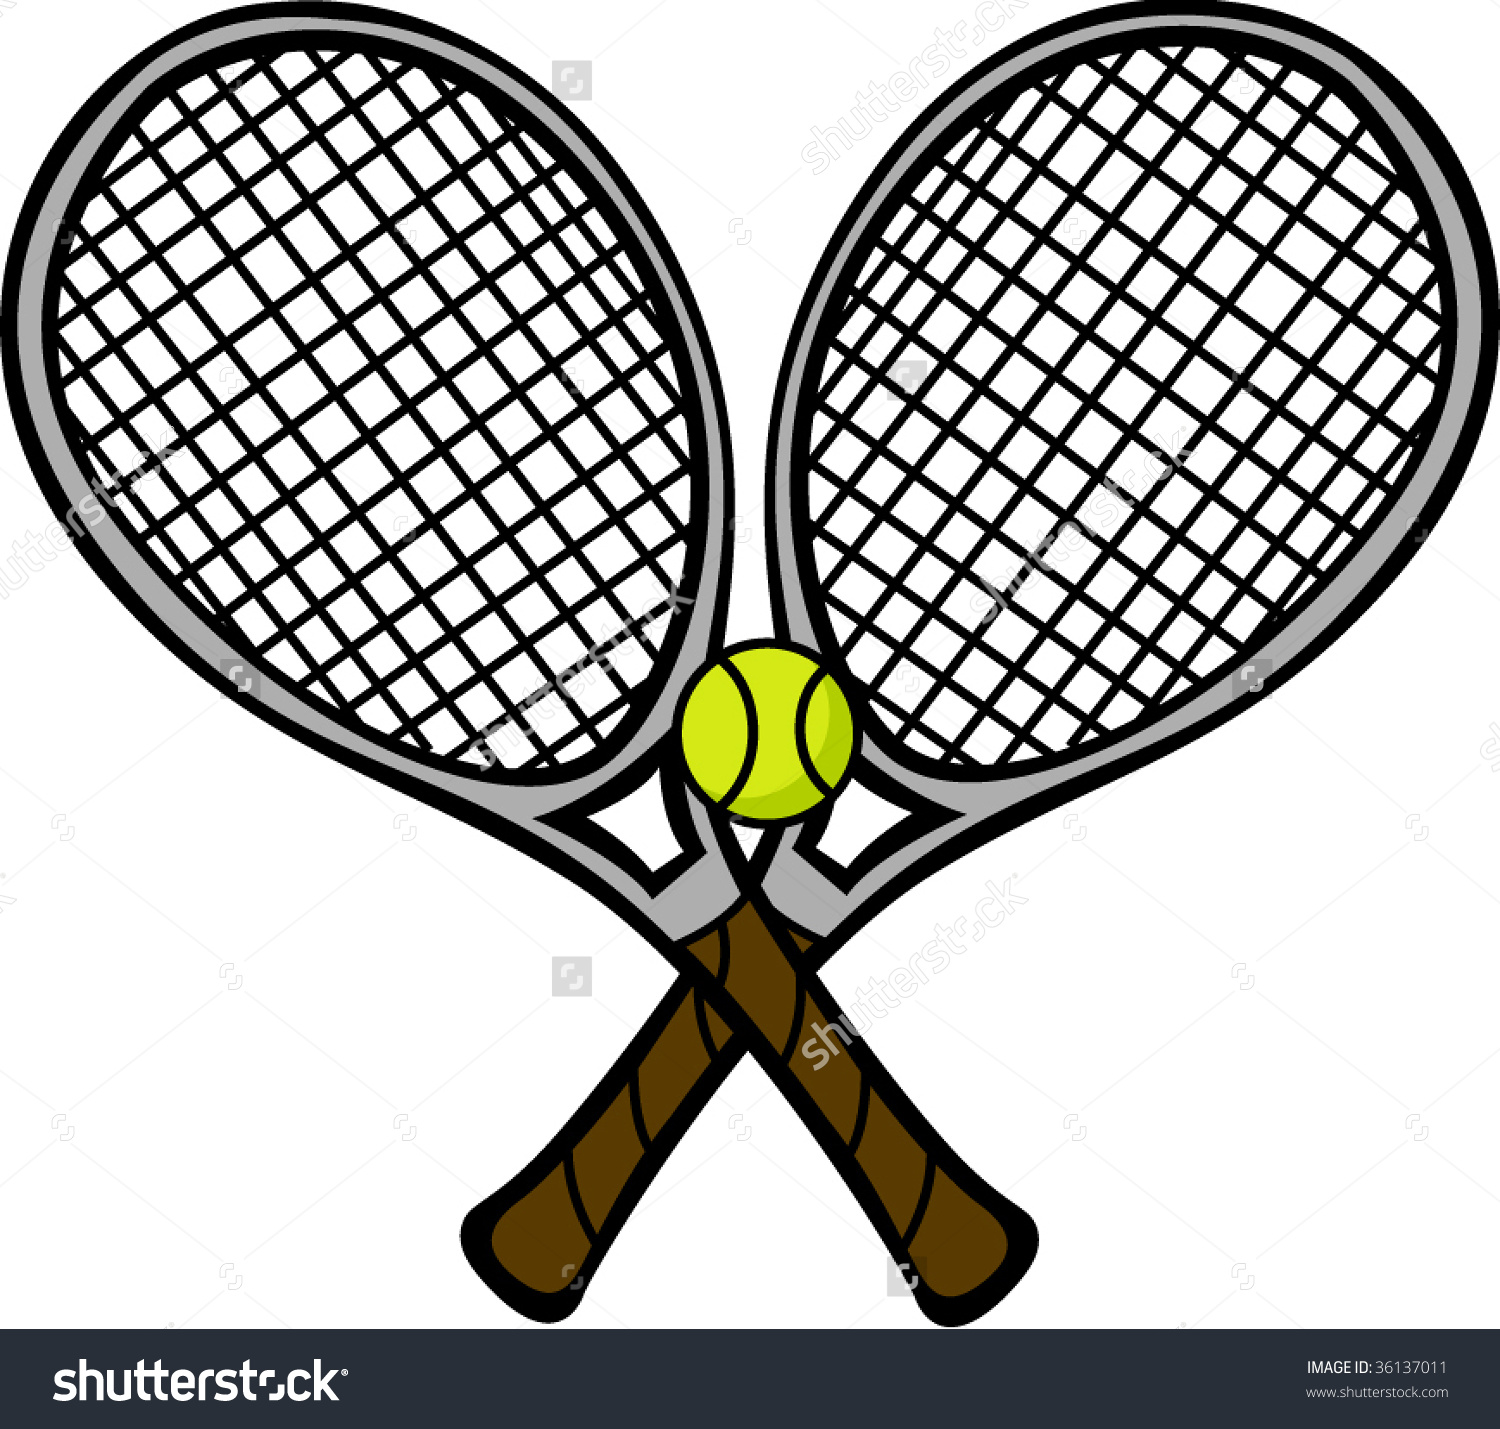 Collection of Racket clipart | Free download best Racket clipart on